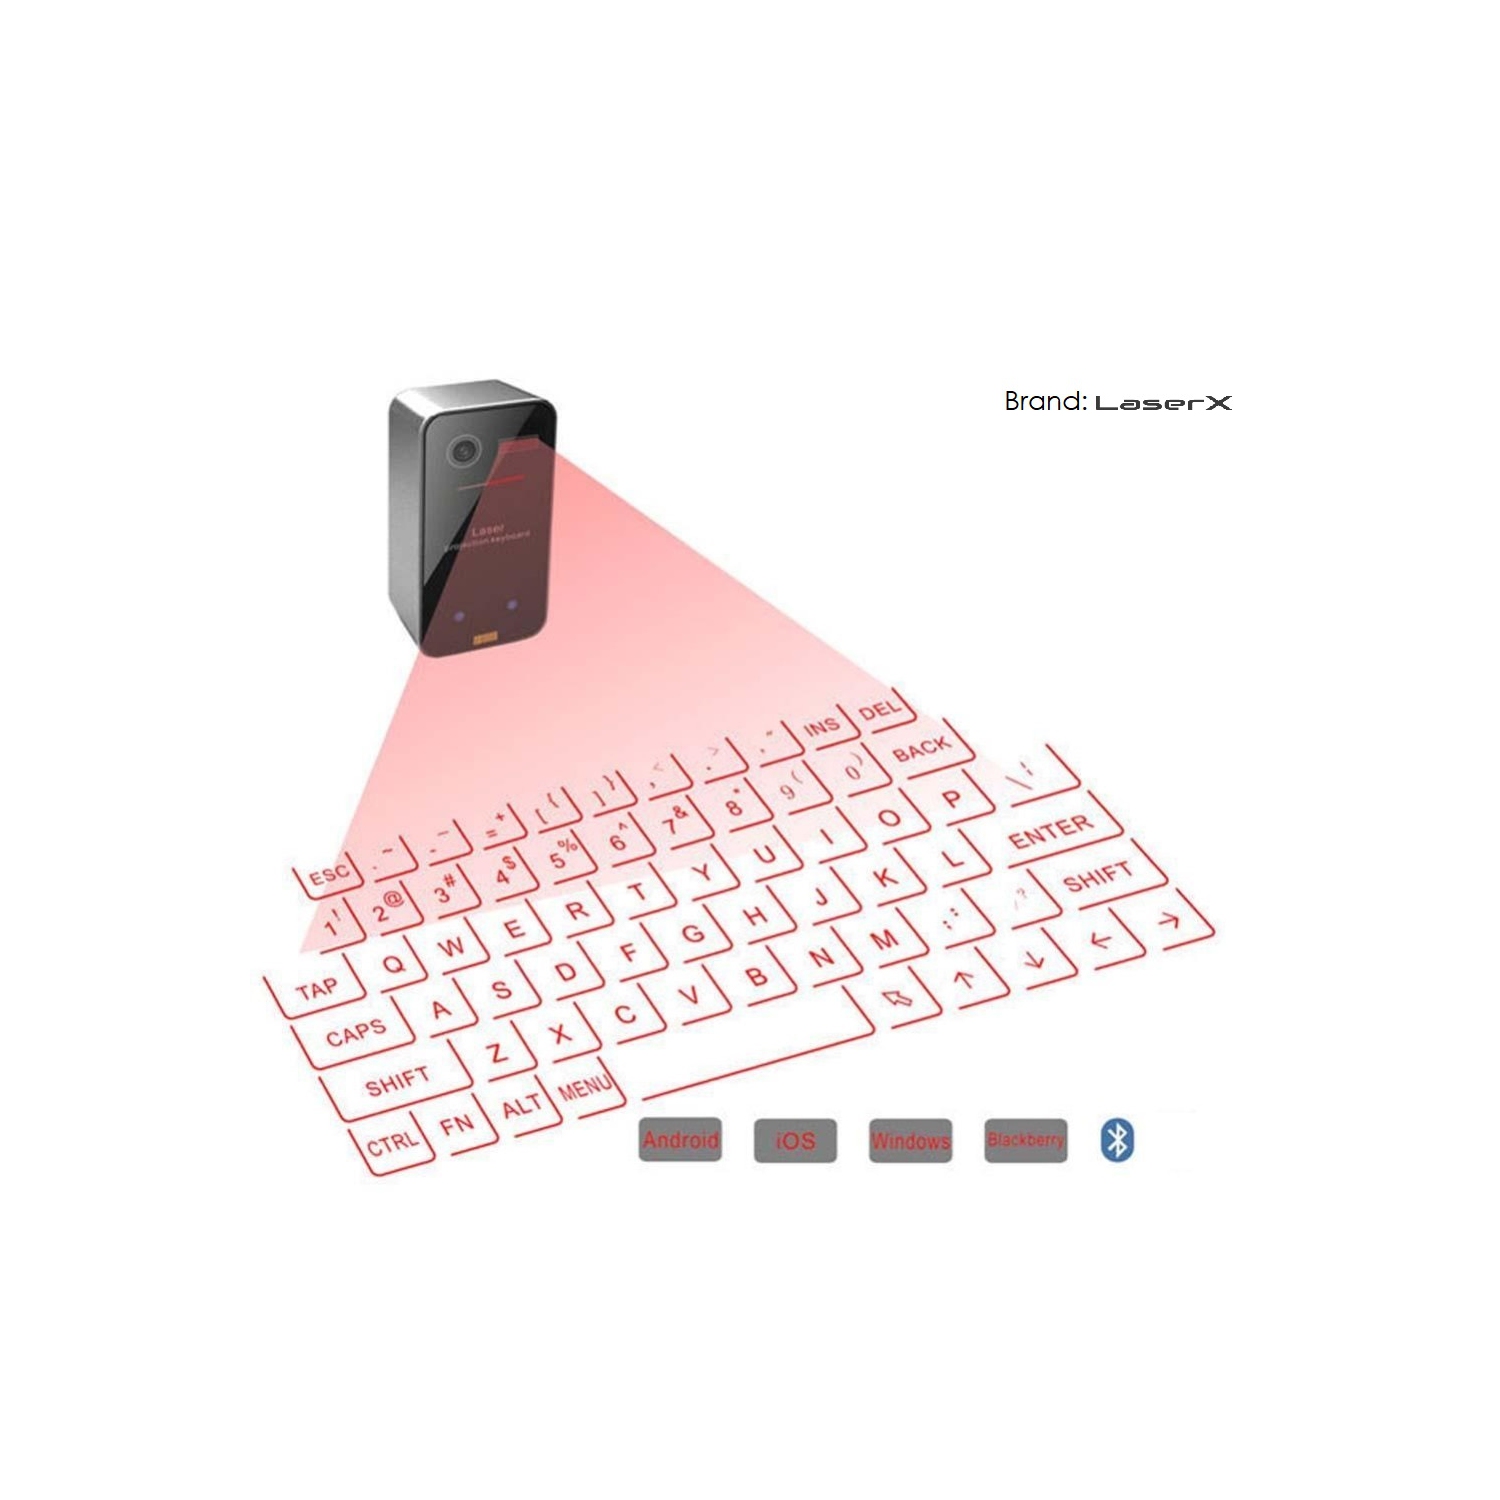 (LaserX) Wireless Laser Projection Bluetooth Virtual Keyboard for Iphone, Ipad, Smartphone and Tablets